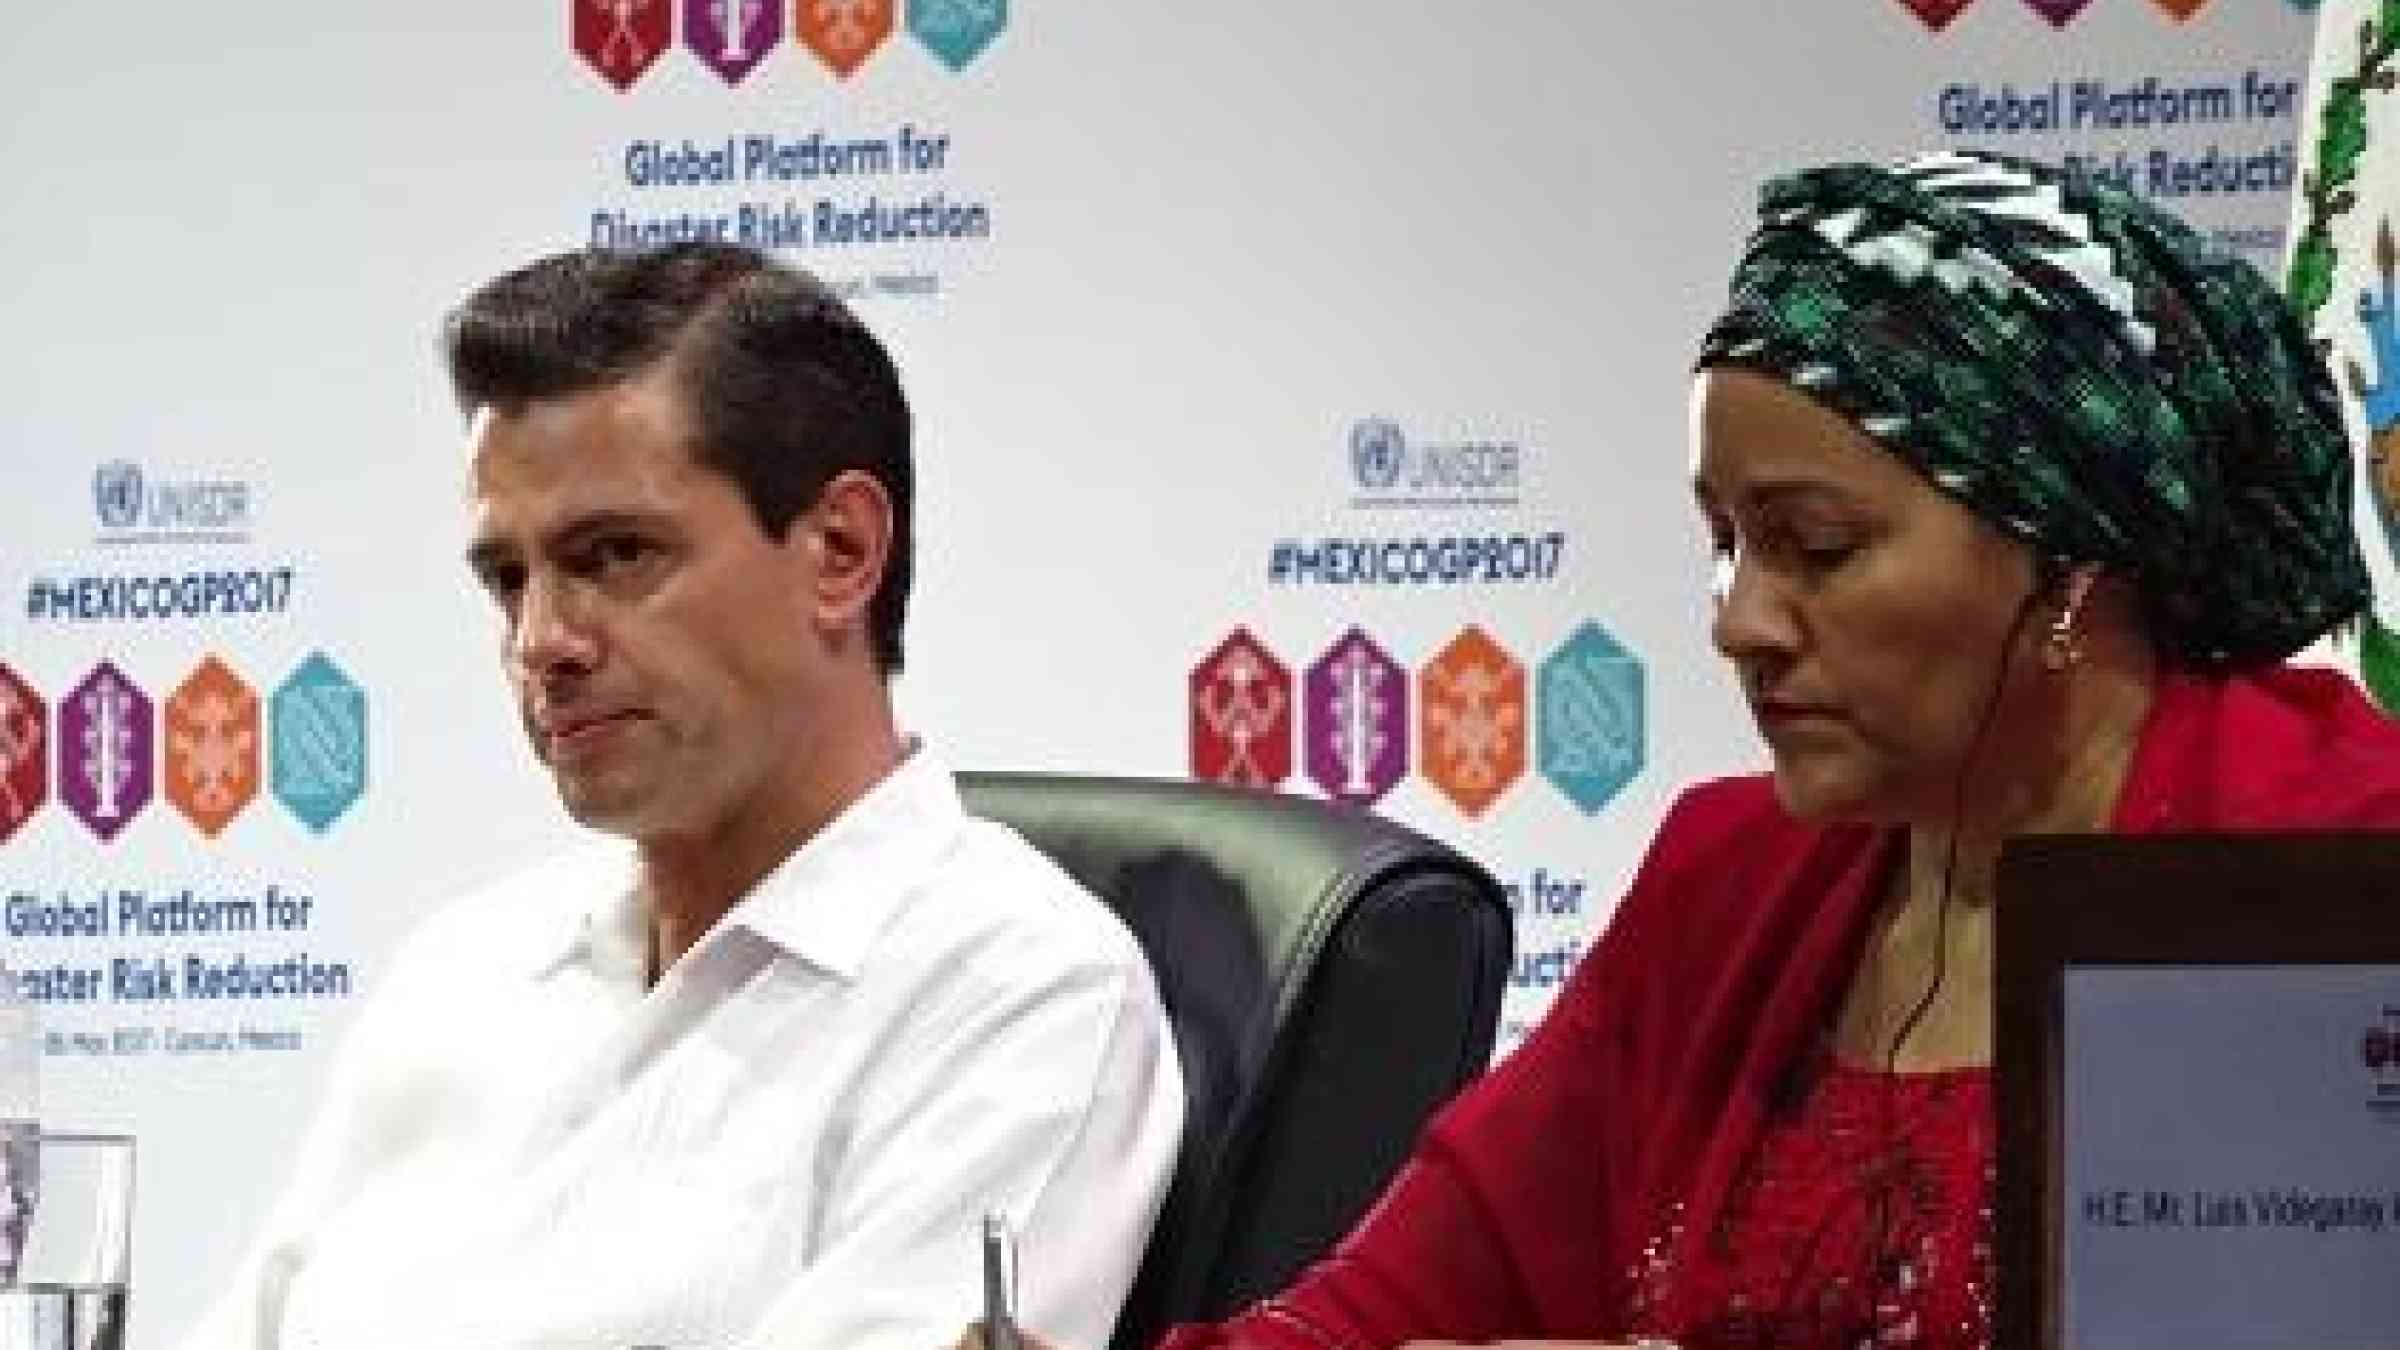 President of Mexico, Mr. Enrique Peña Nieto, and the UN Deputy Secretary-General, Ms. Amina Mohammed, listen to a speech at the opening of the Global Platform for Disaster Risk Reduction (Photo: UNISDR)